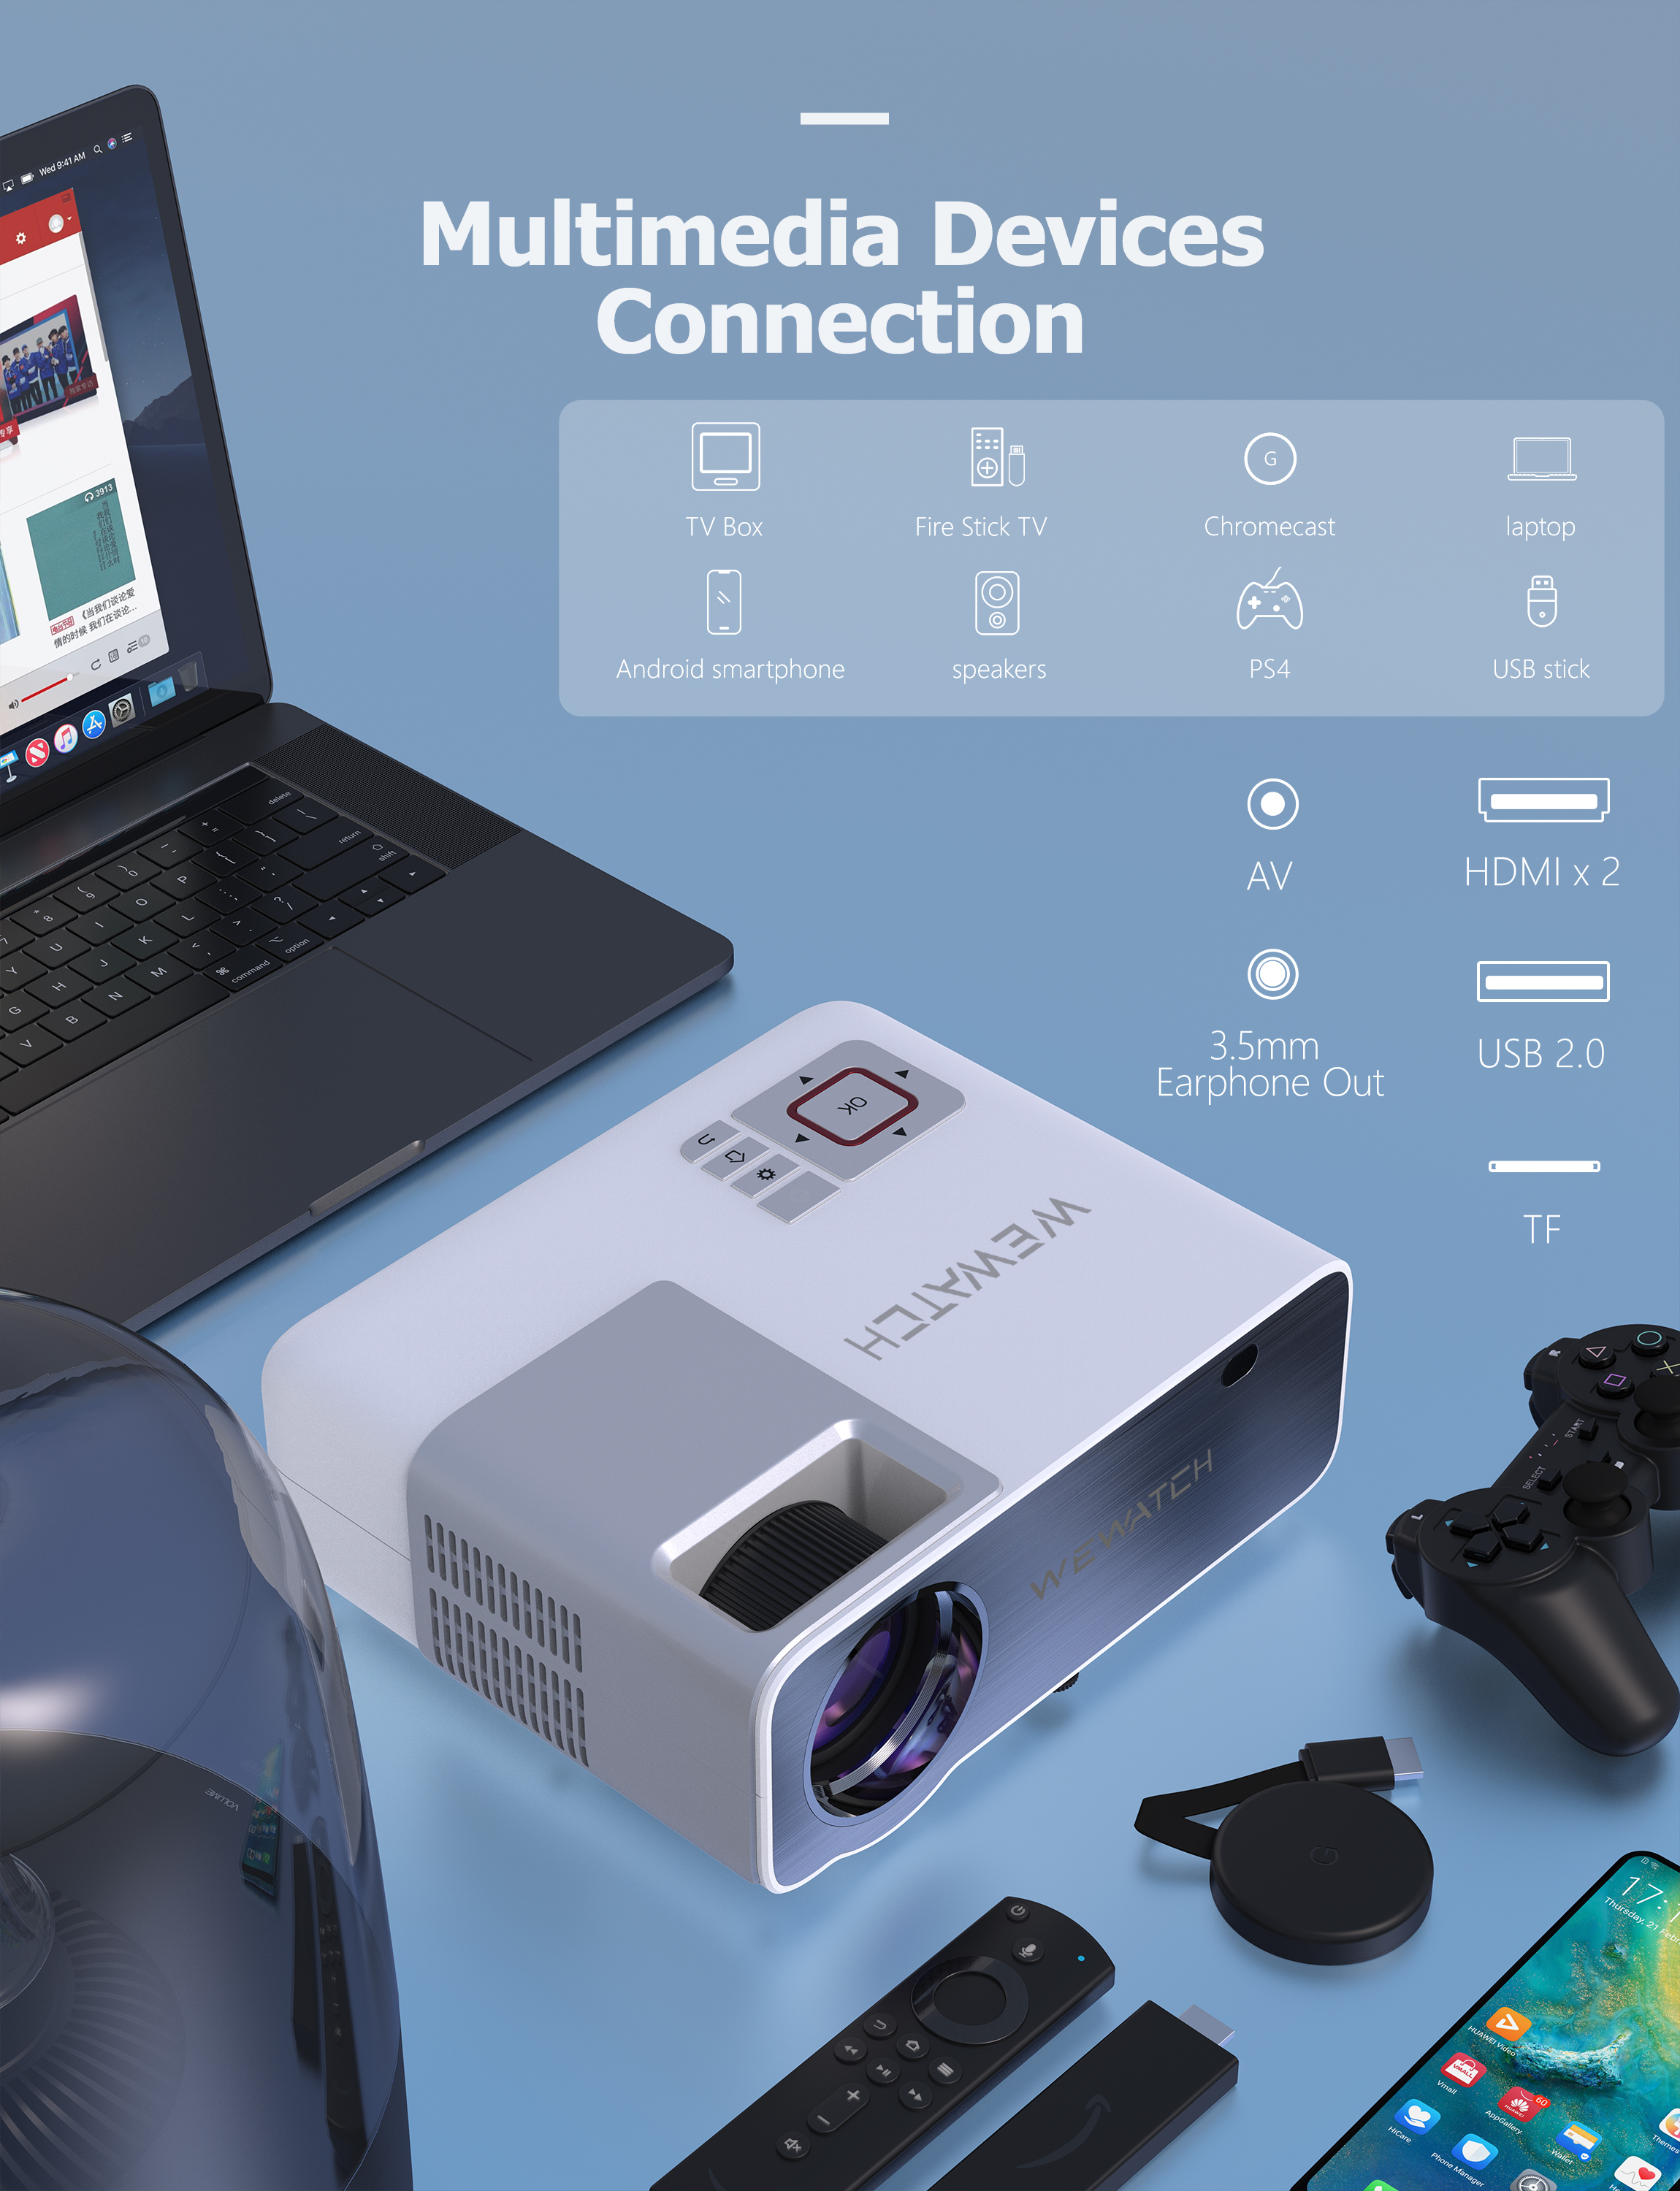 WEWATCH 5G Native 1080p Home Cinema Projector with ±45° Keystone Correction $68 + Free Shipping and 1-Year Warranty